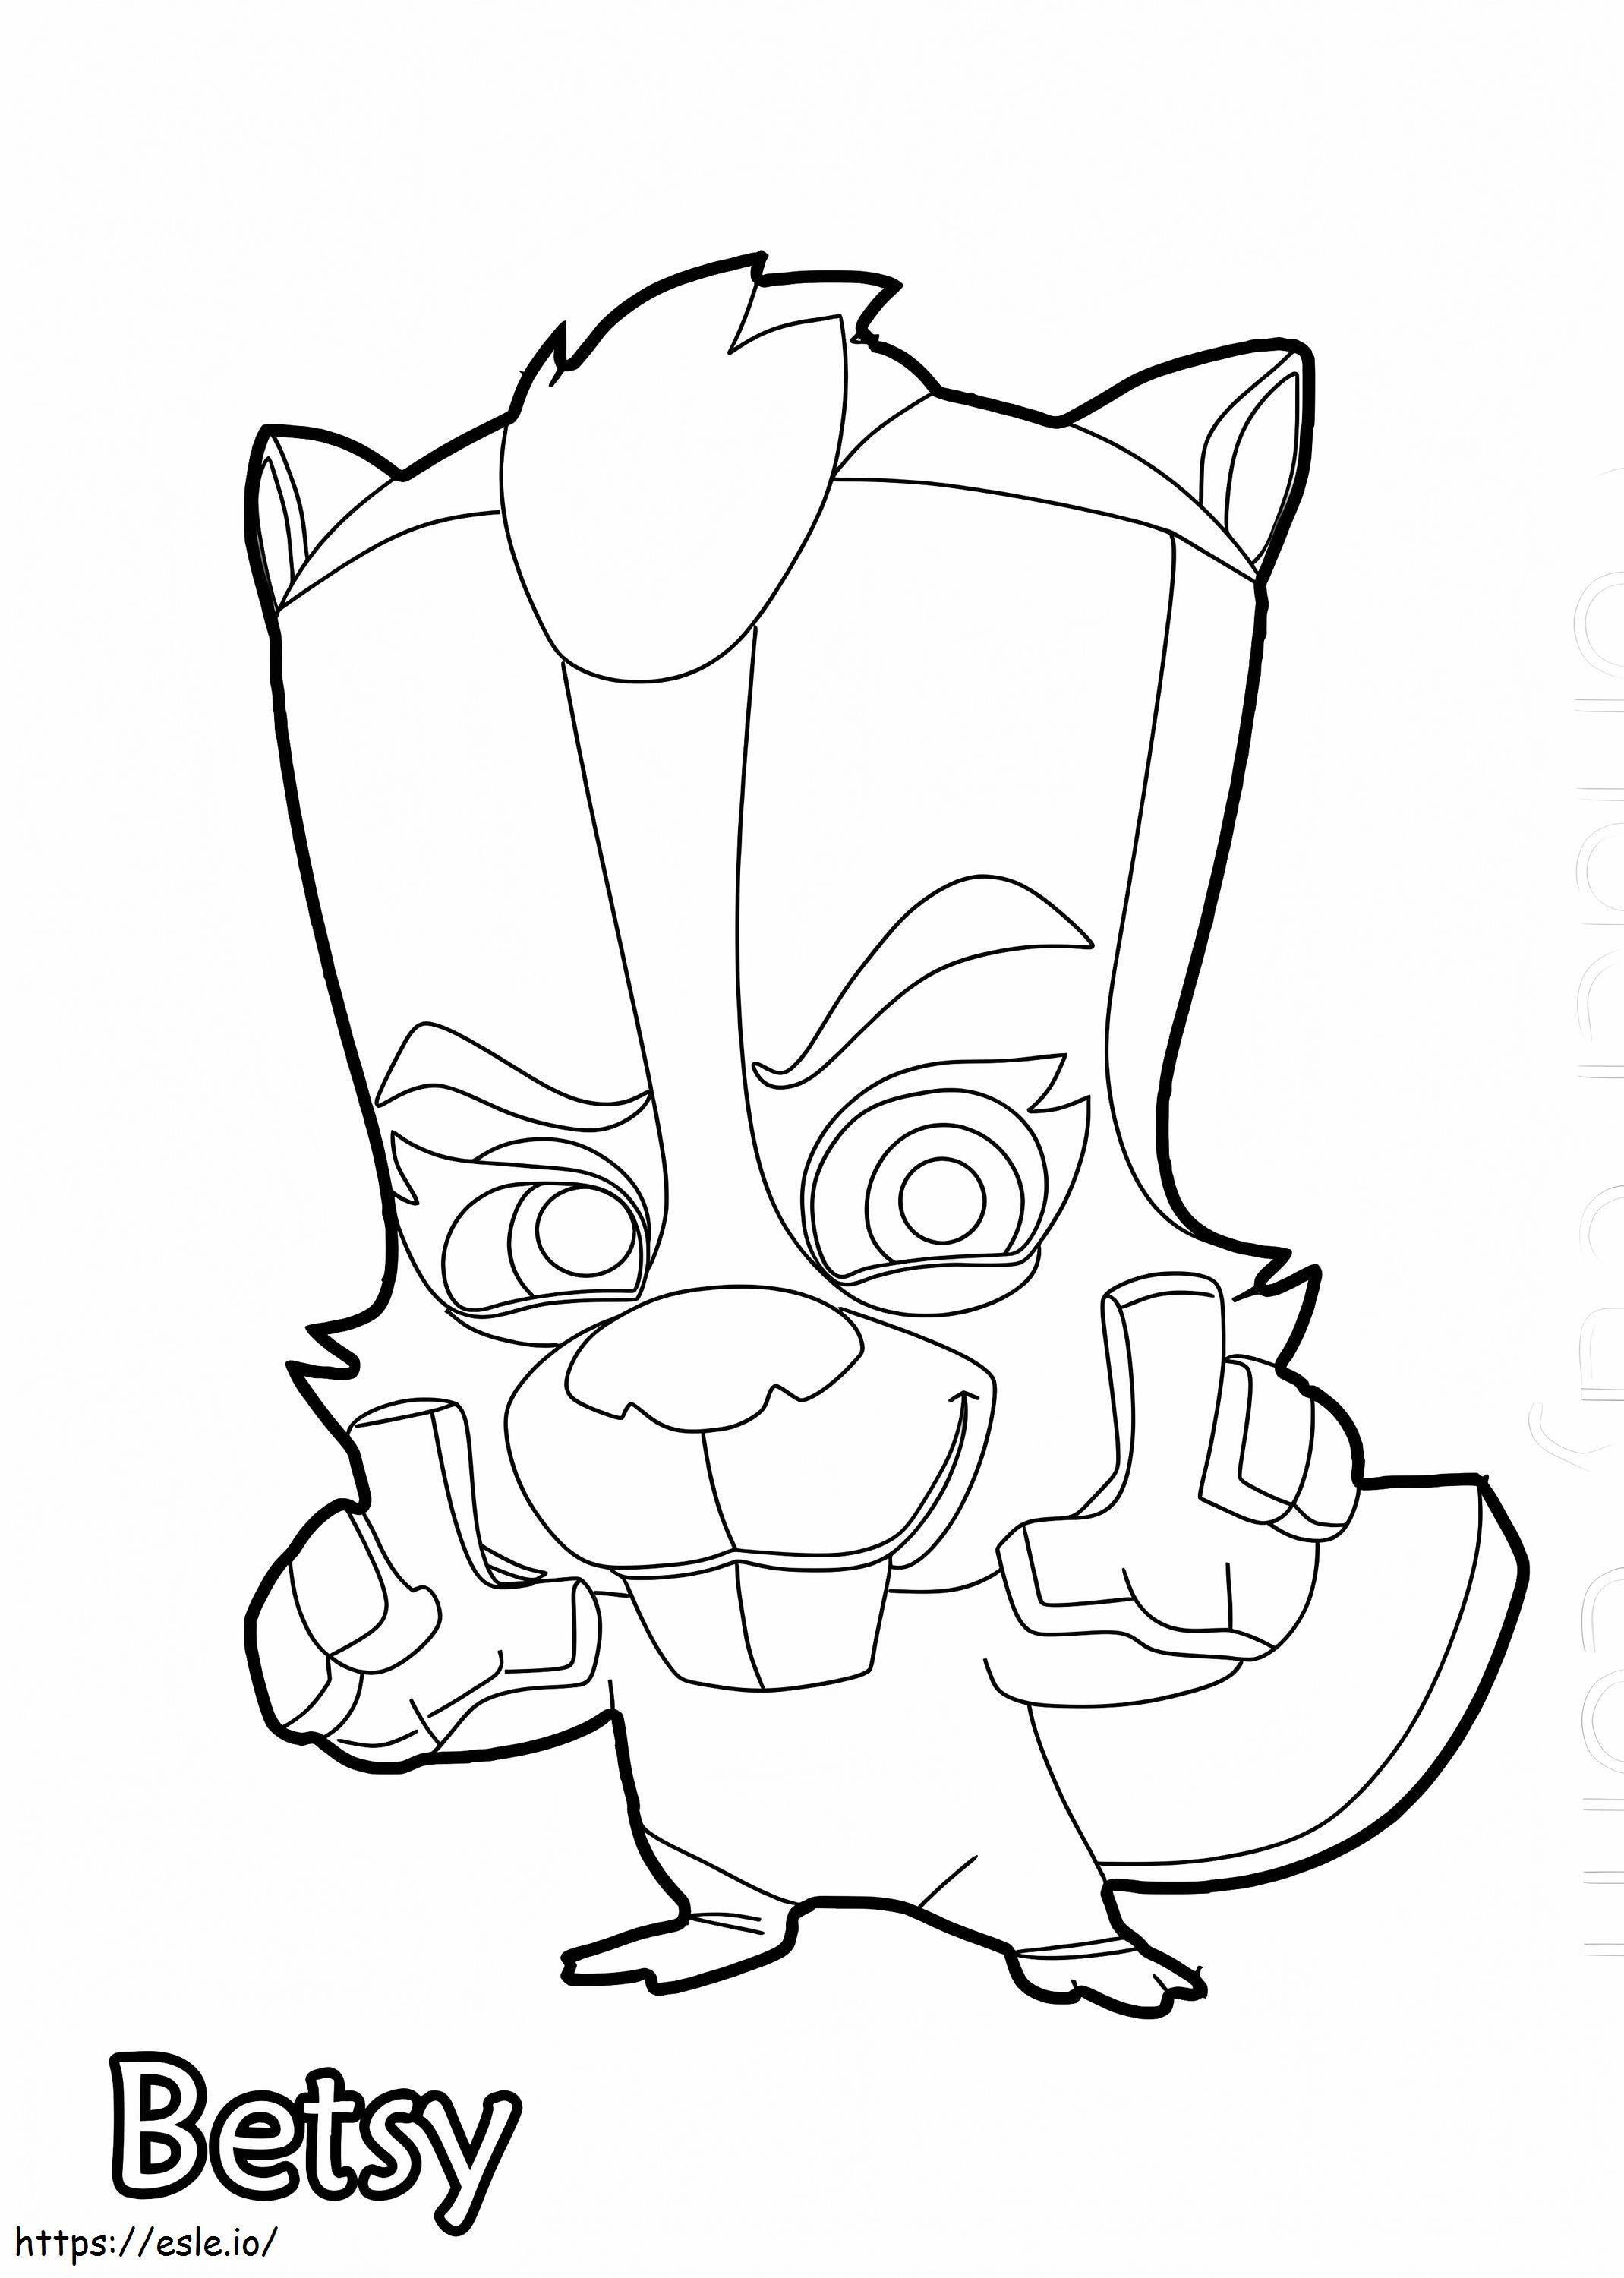 Betsy Zooba coloring page